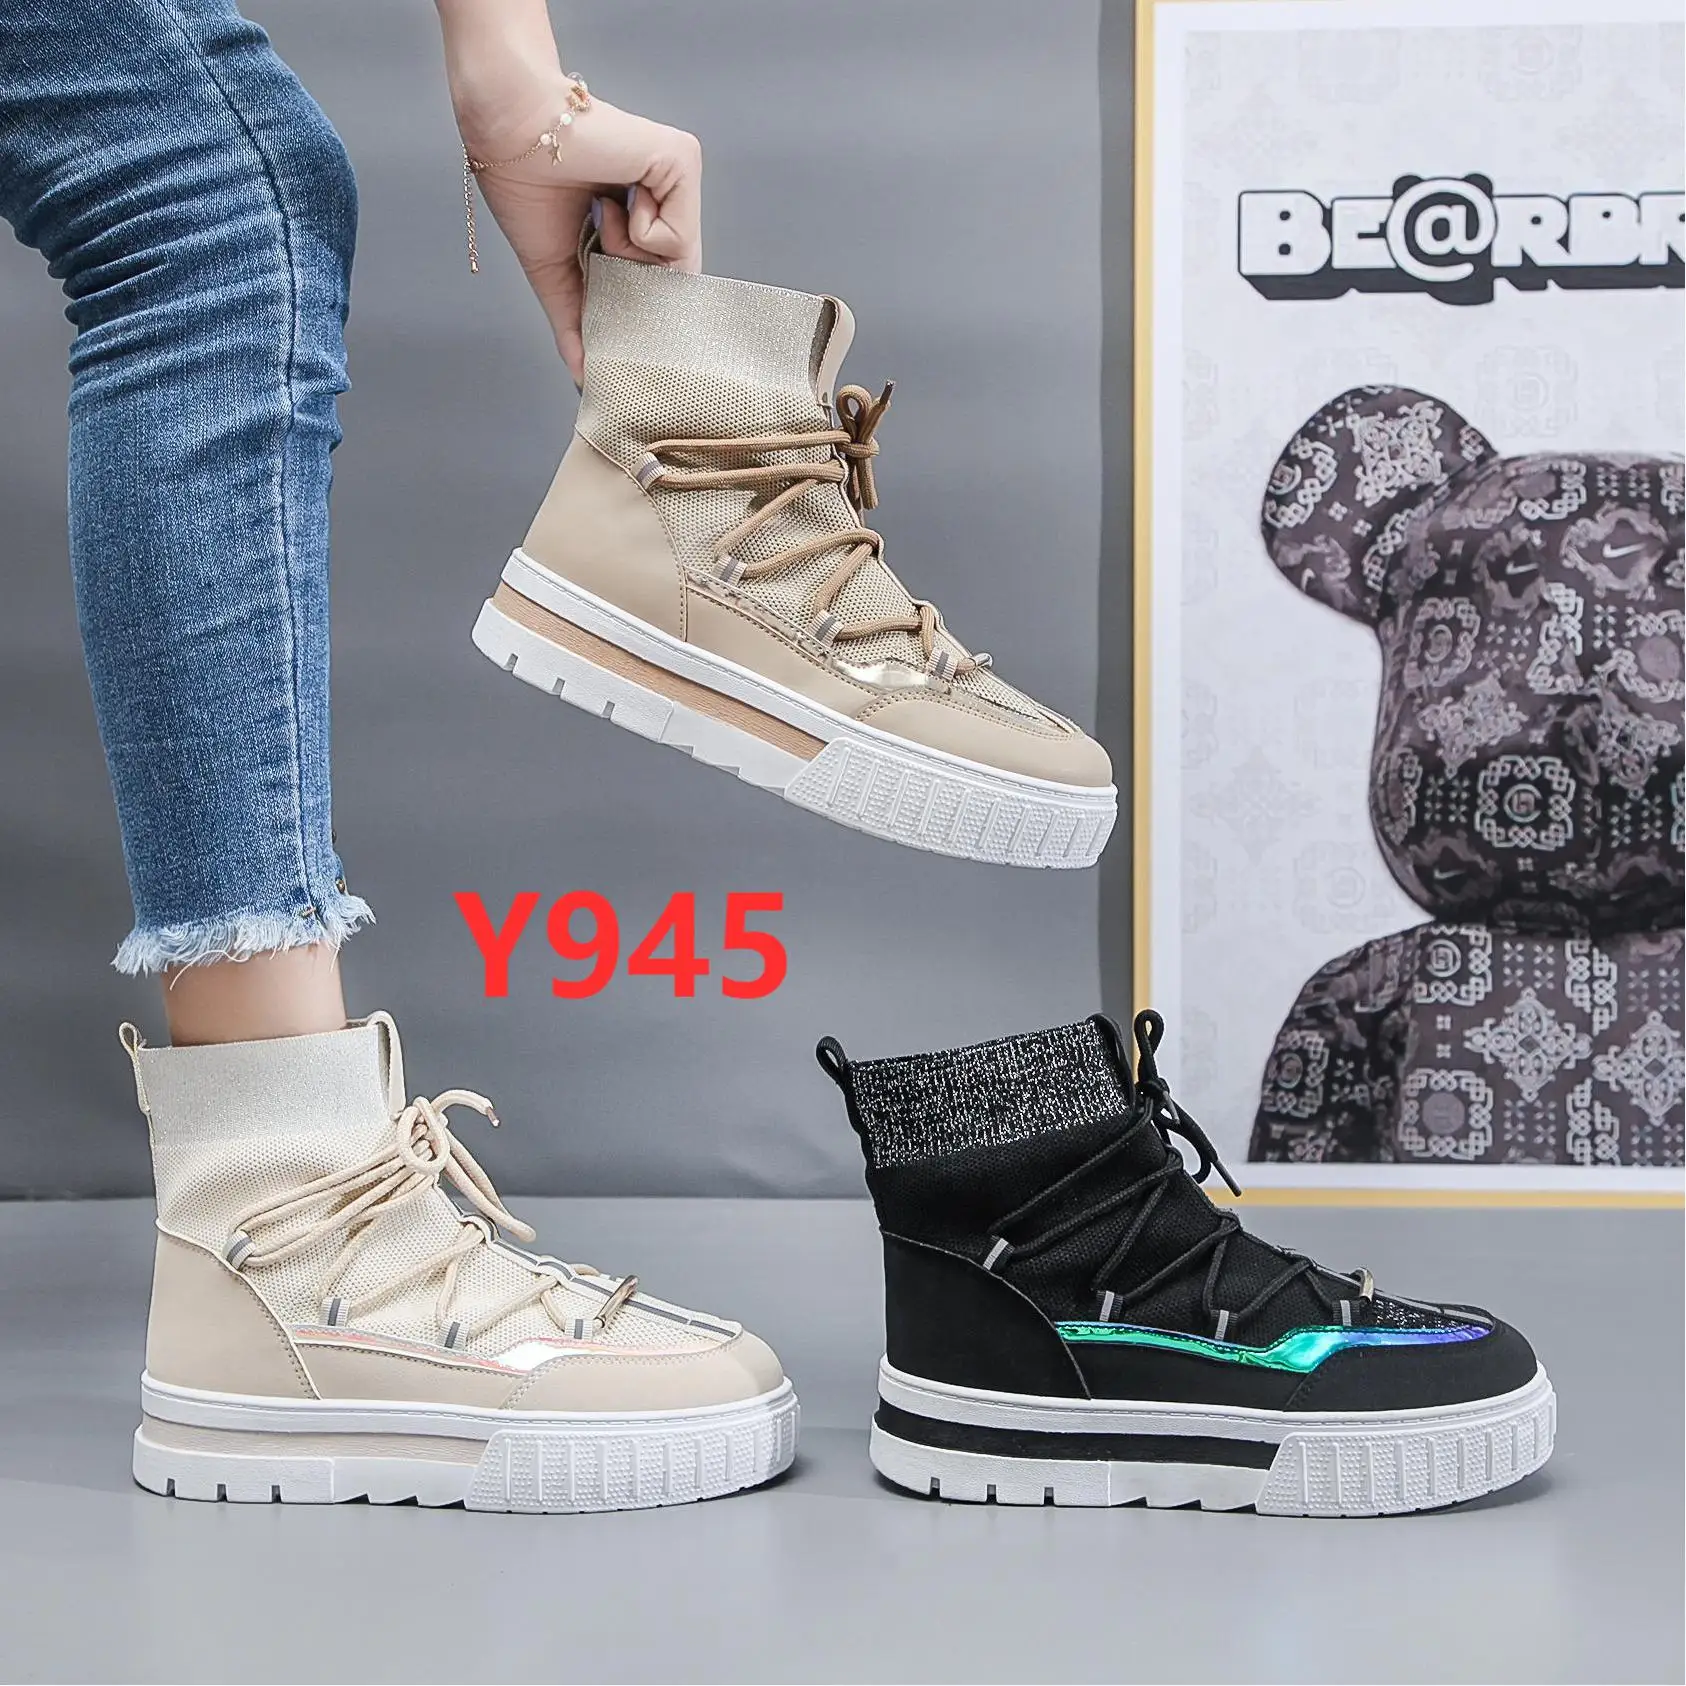 injection soles cheap price customized high cut women tennis shoes women Lace up boots net sneakers